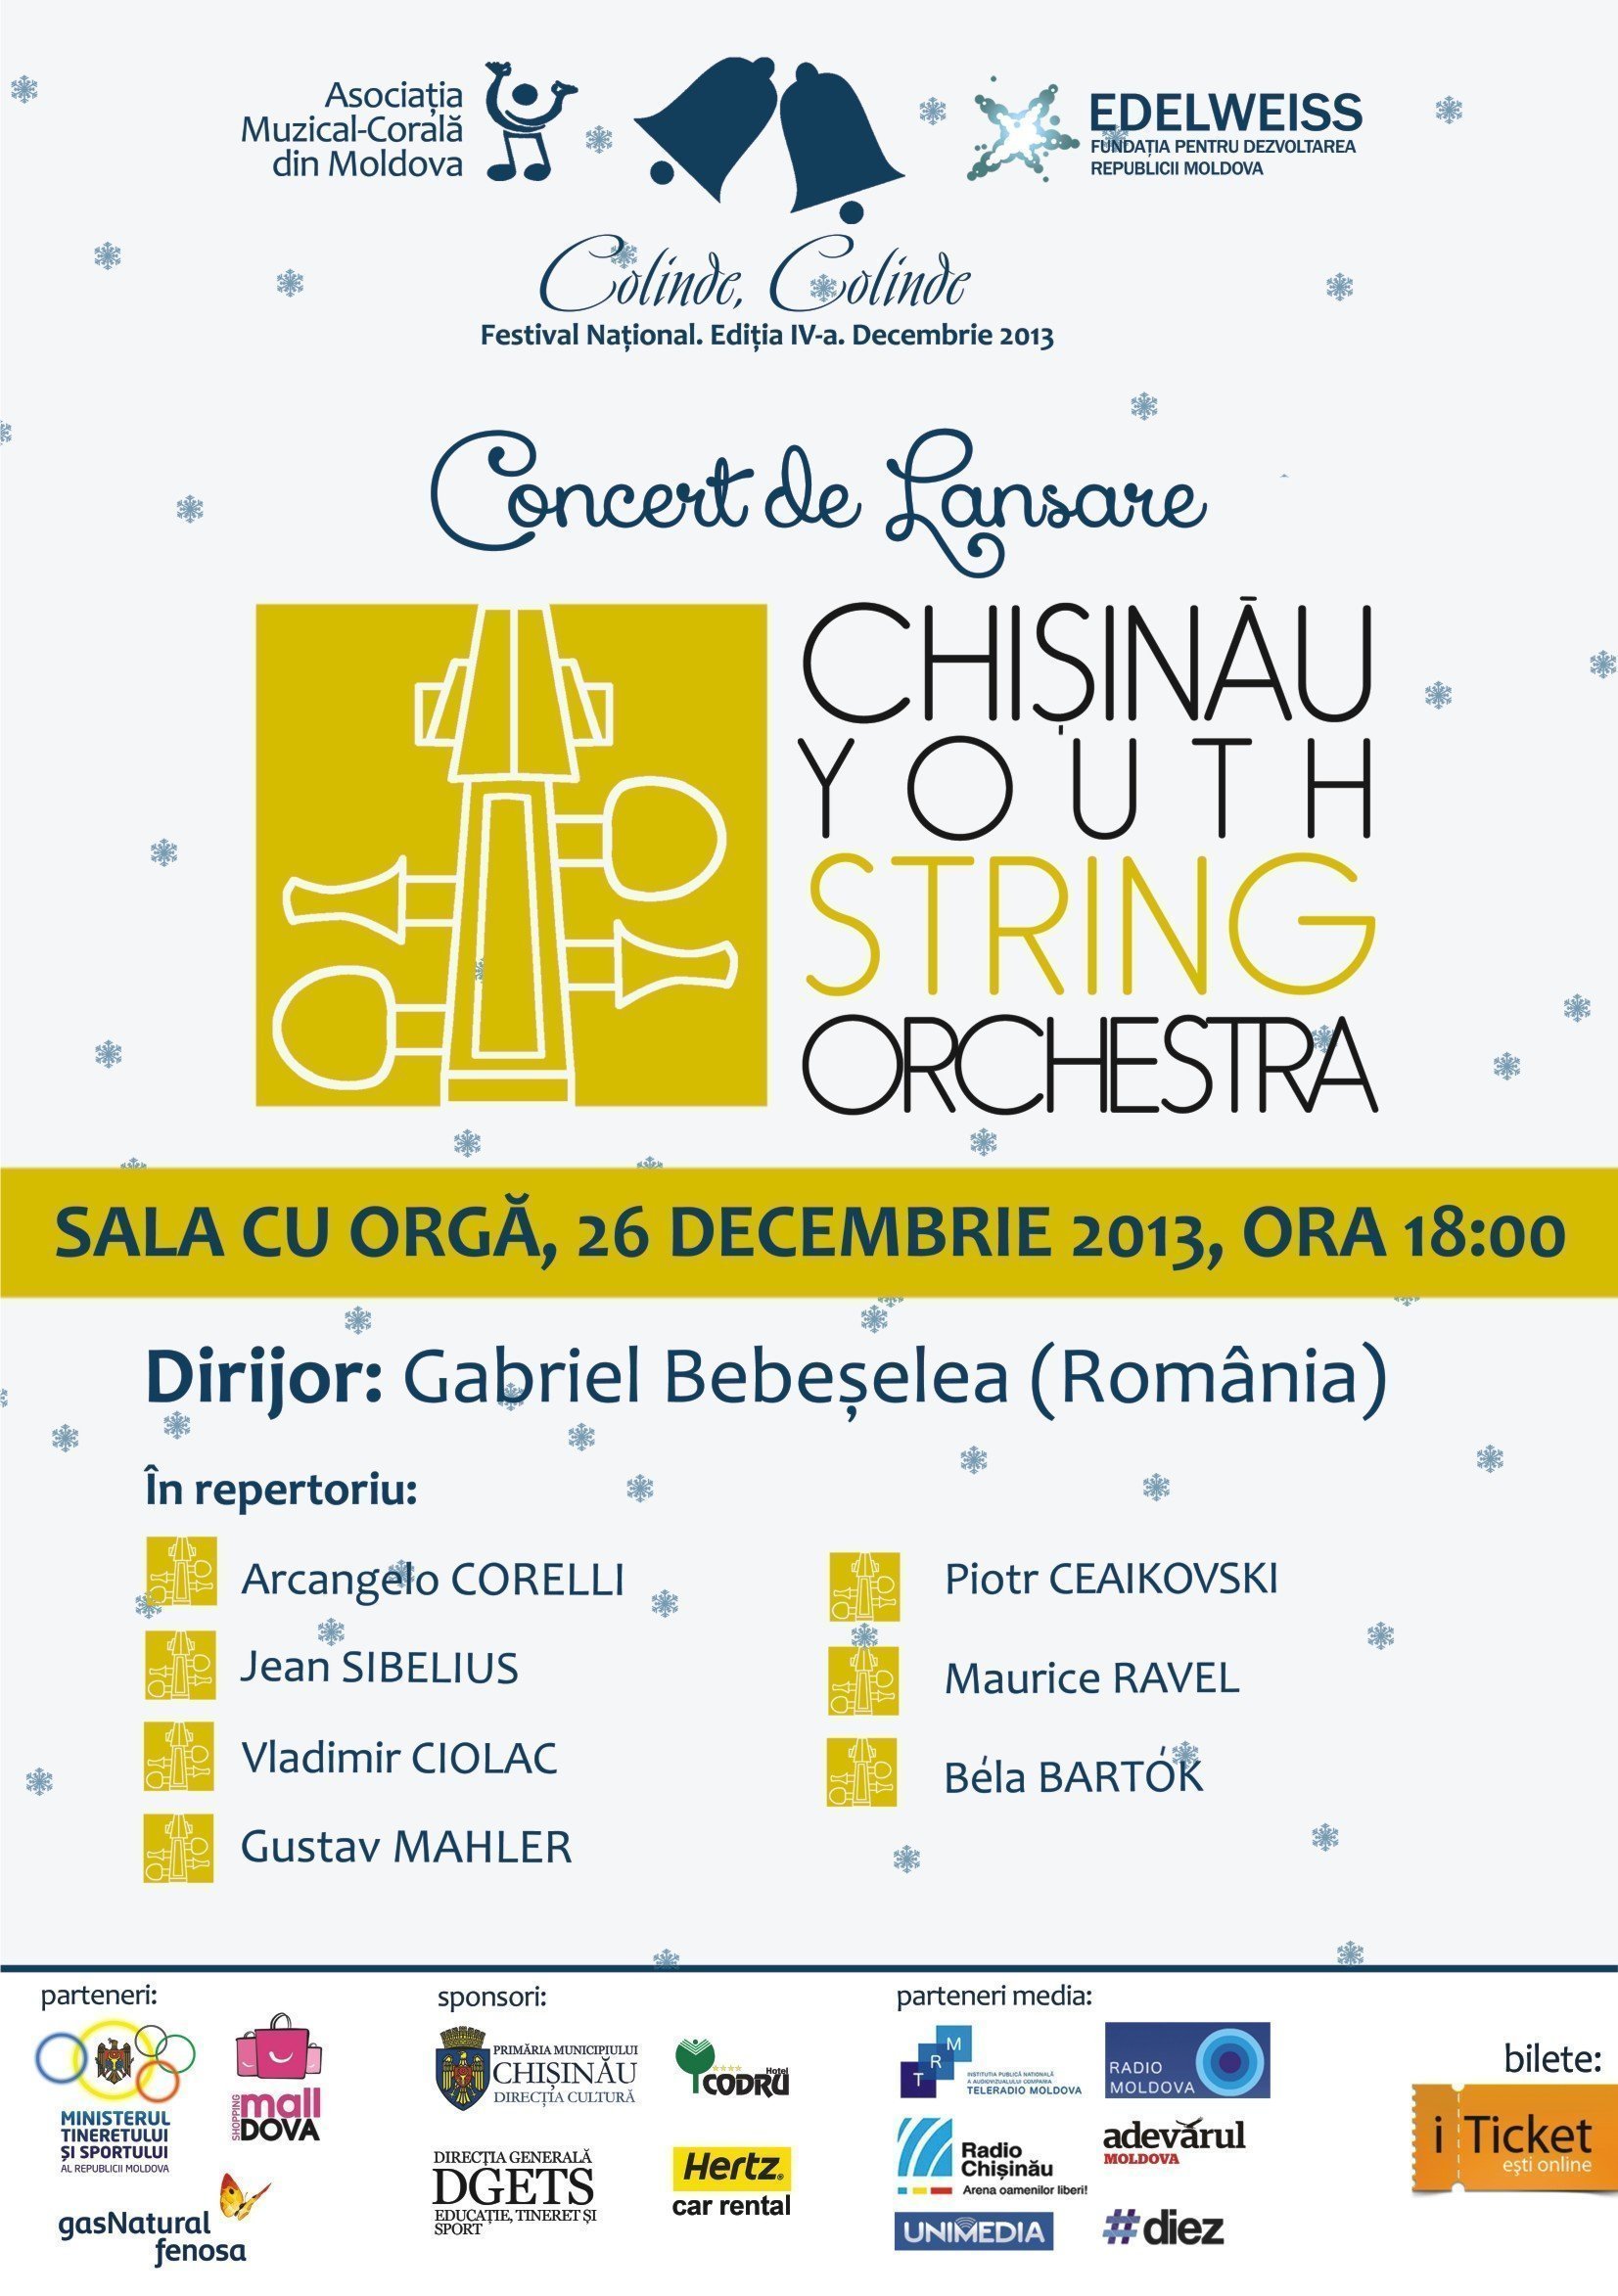 Chisinau Youth String Orchestra(decembrie)